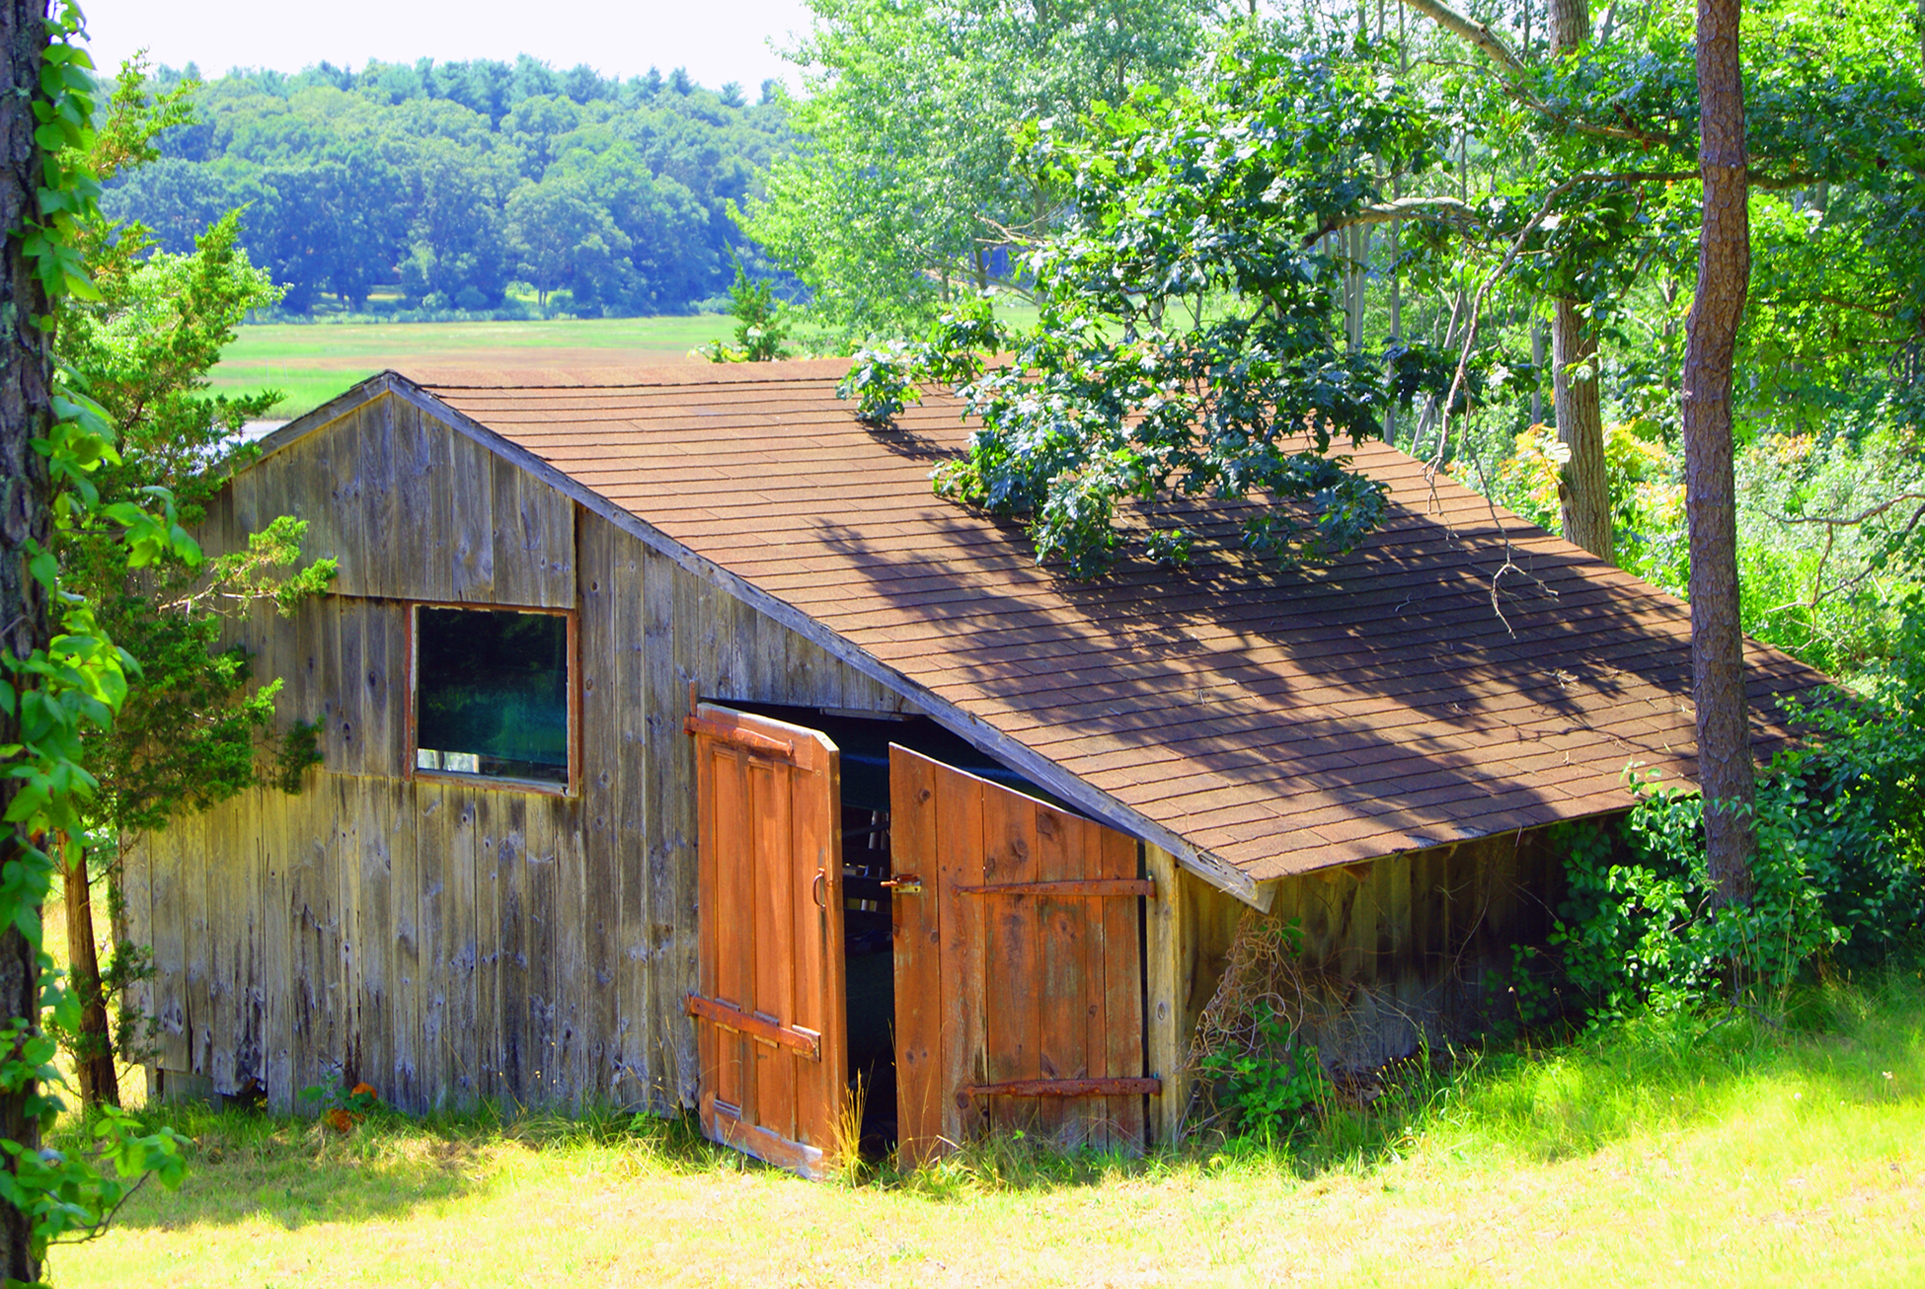 Free Stock Photo 3785-Abandoned Shed 2 | freeimageslive